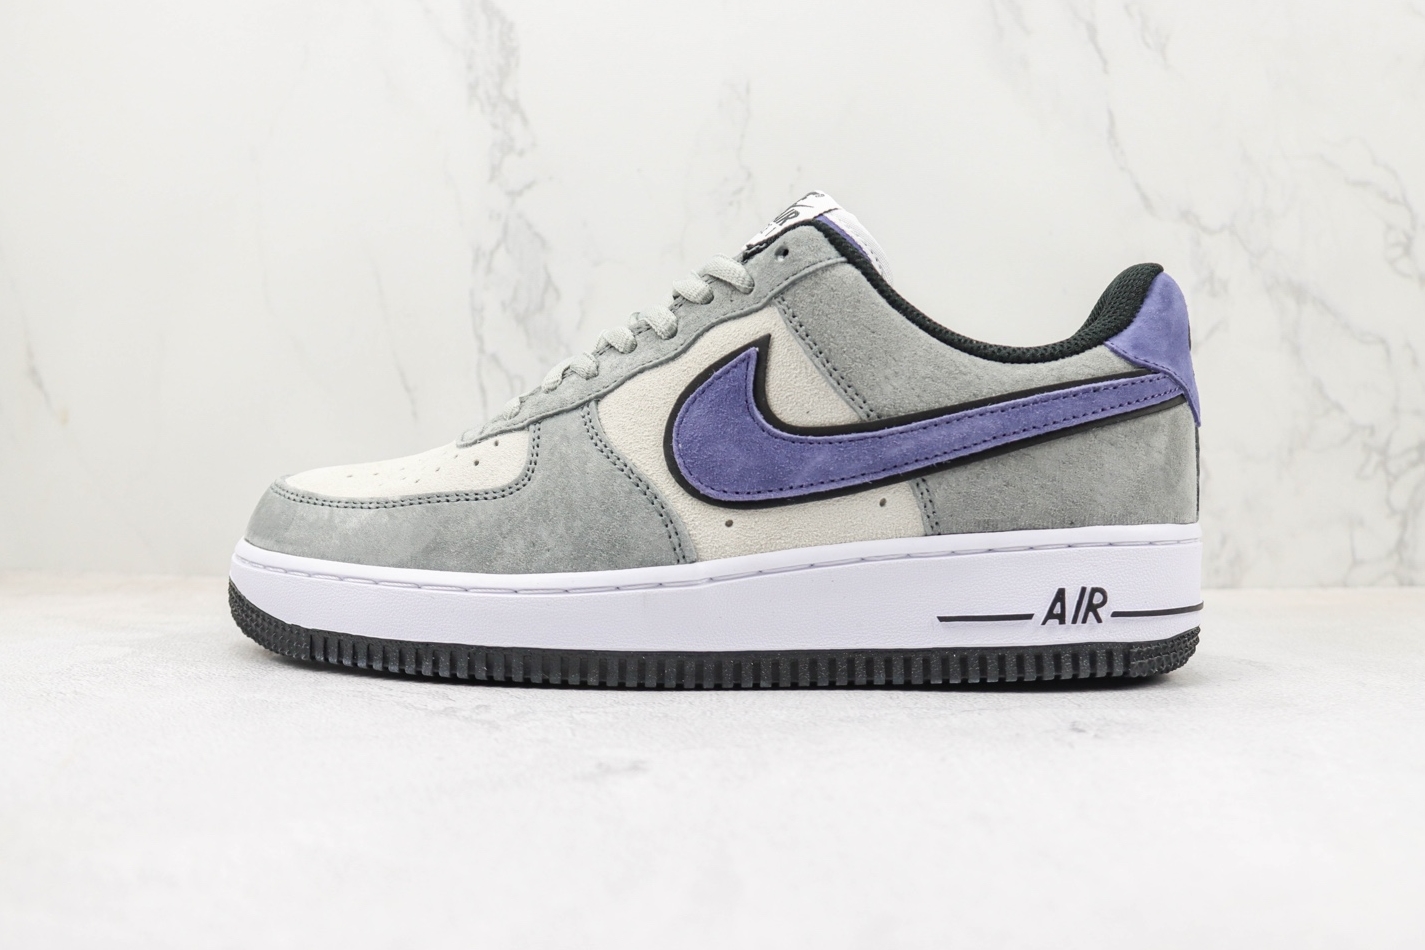 Nike Air Force 1 07 Low Suede Grey Purple White HH9636